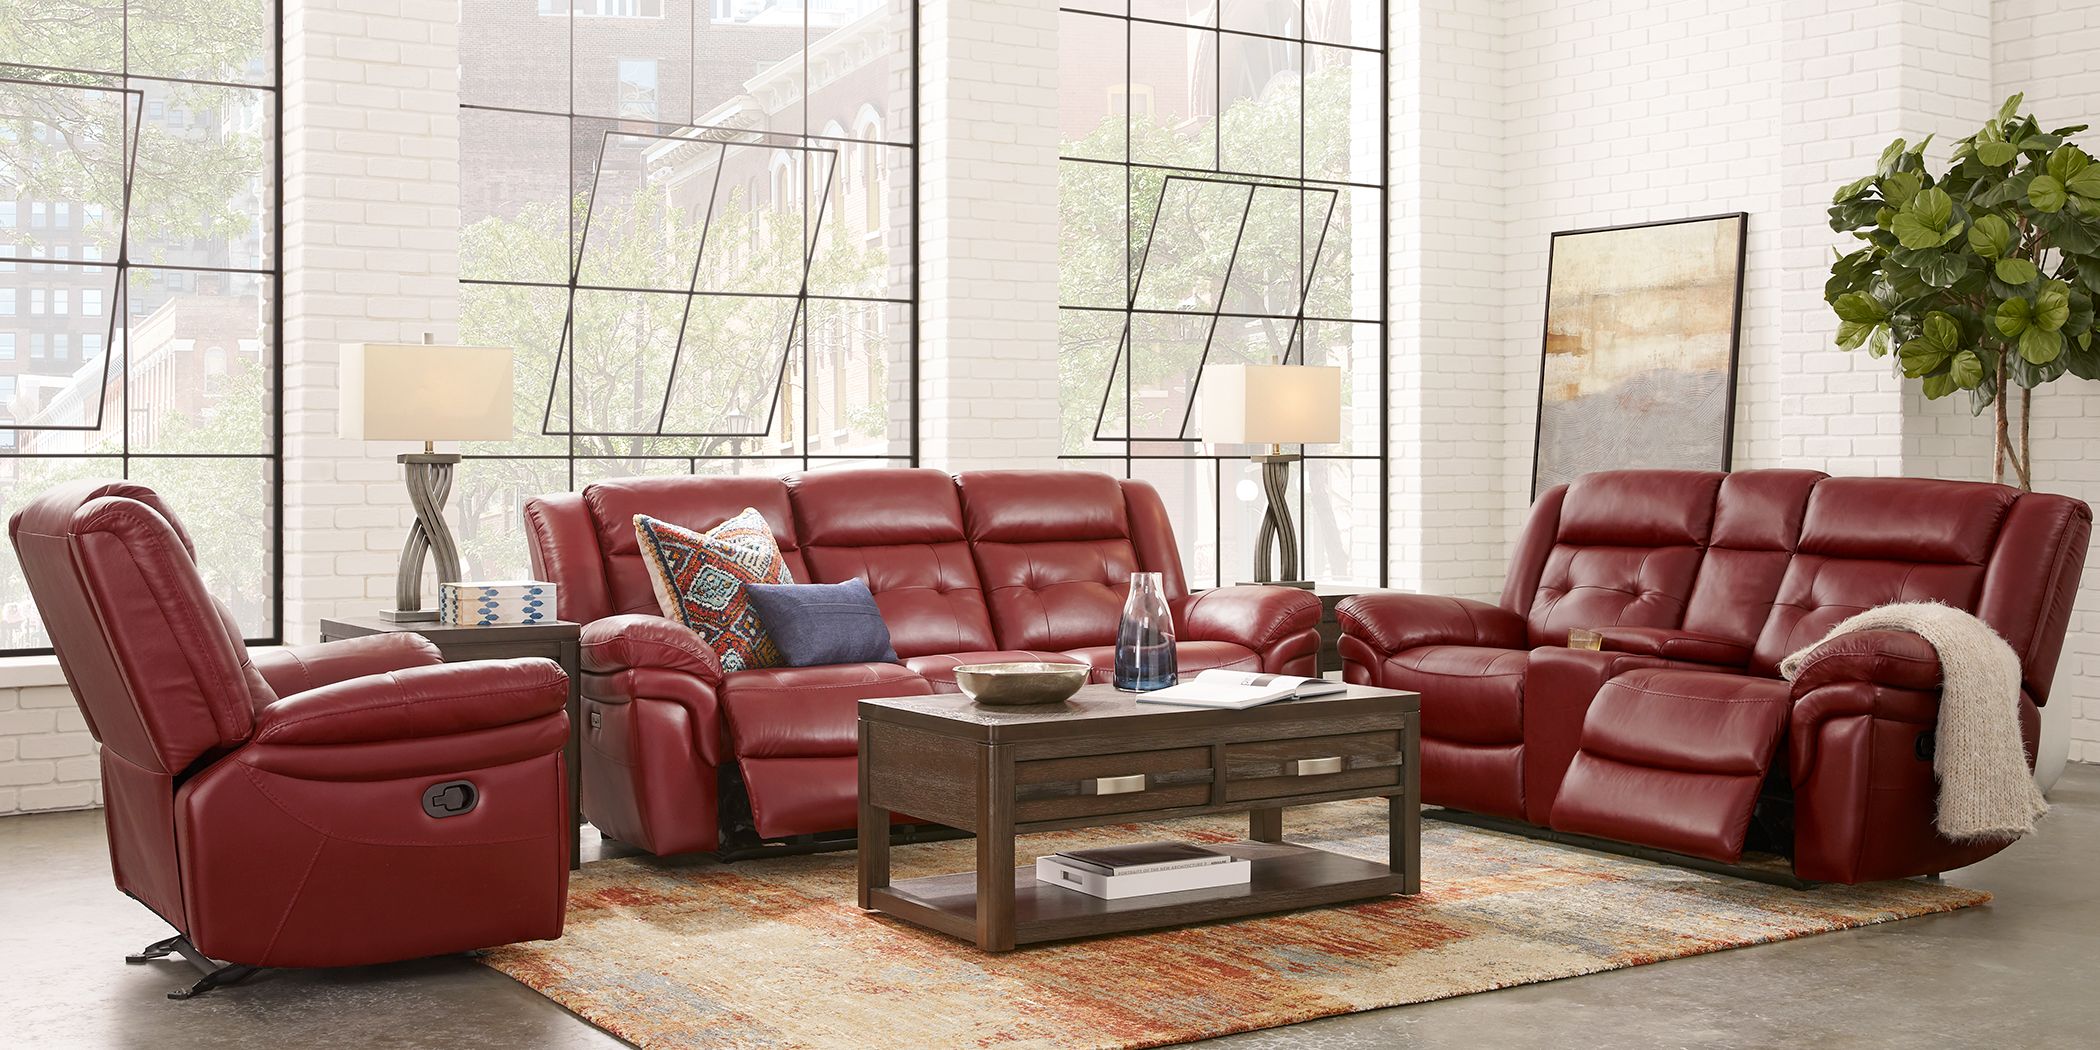 Ventoso Red Leather 5 Pc Reclining Living Room